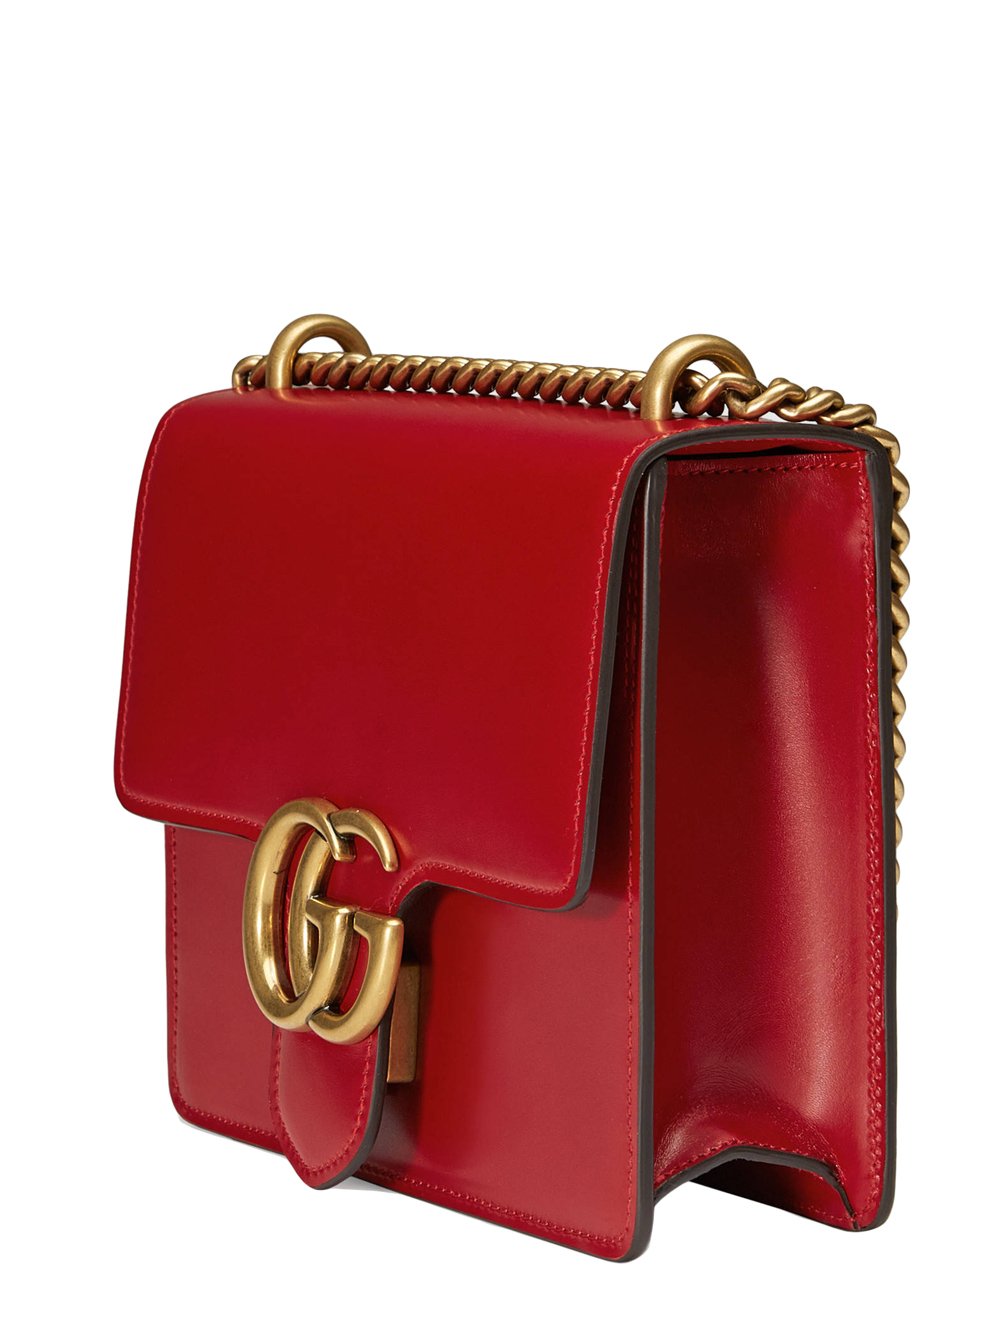 Gucci Small Marmont Bag - Red in Red | Lyst